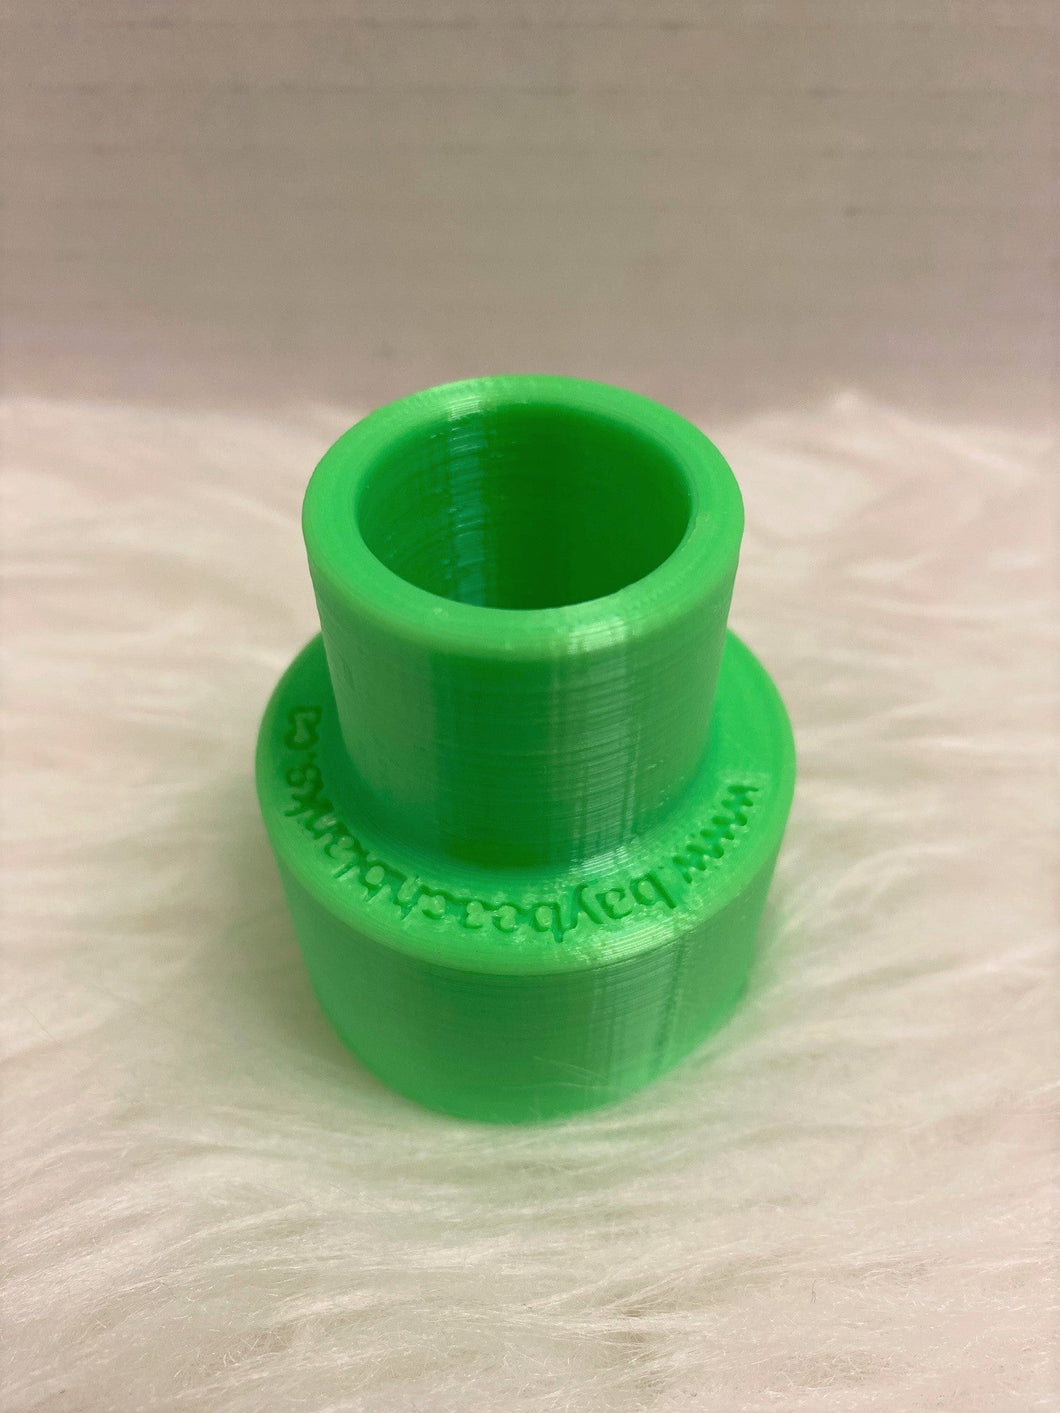 17 oz. Water Bottle Adapter - Bay Beach Blanks 3D printed water bottle adapter to attach the bottle onto the turner for doing Crystalac and Epoxy crafting